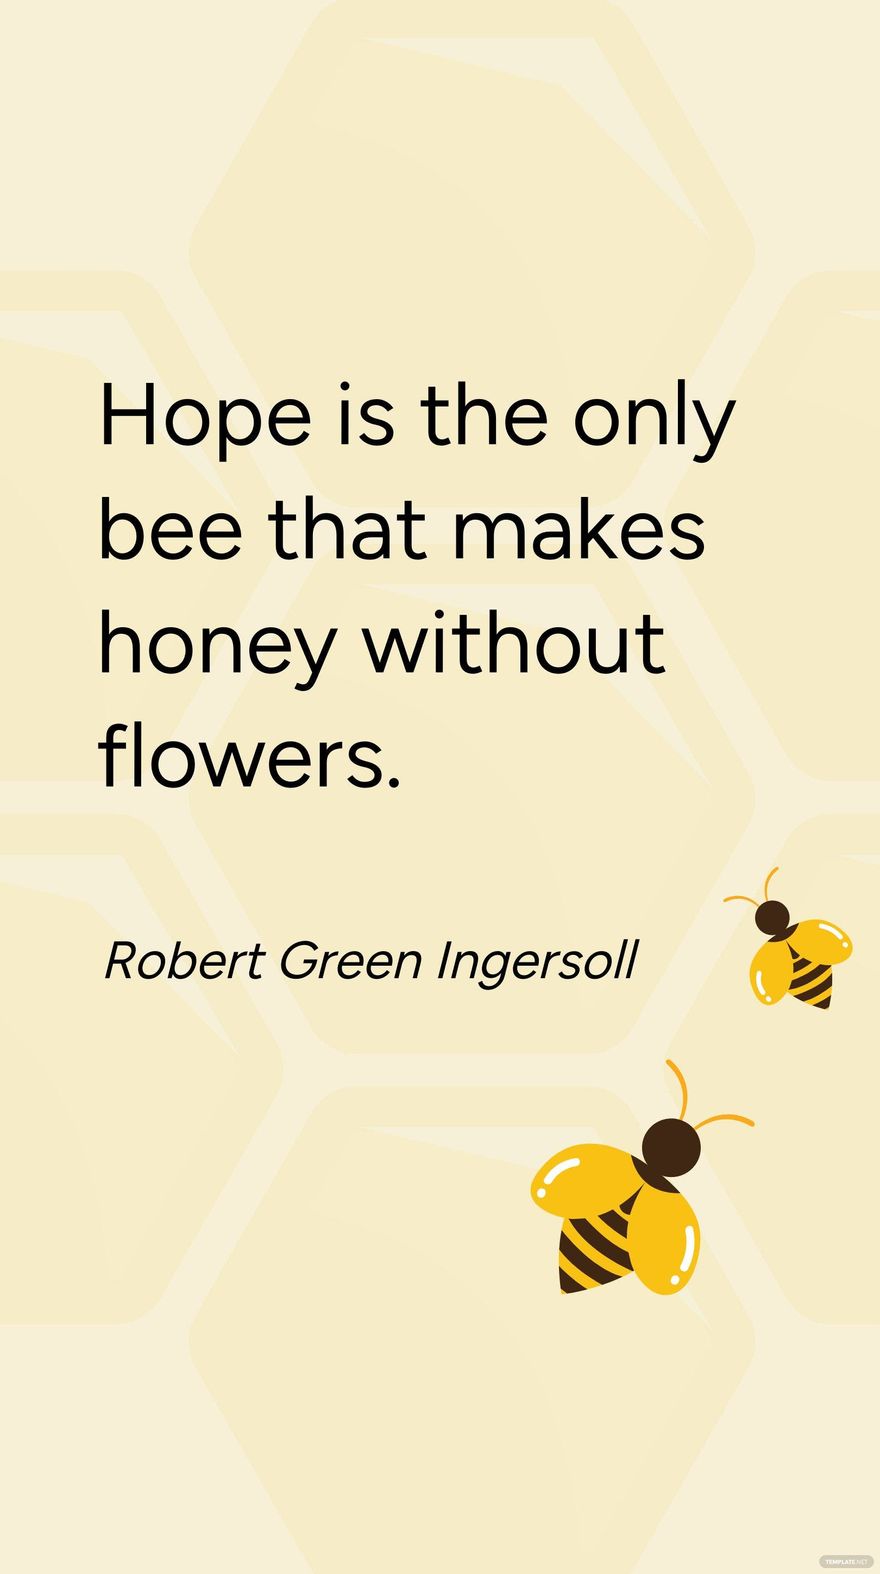 Robert Green Ingersoll - Hope is the only bee that makes honey without flowers.